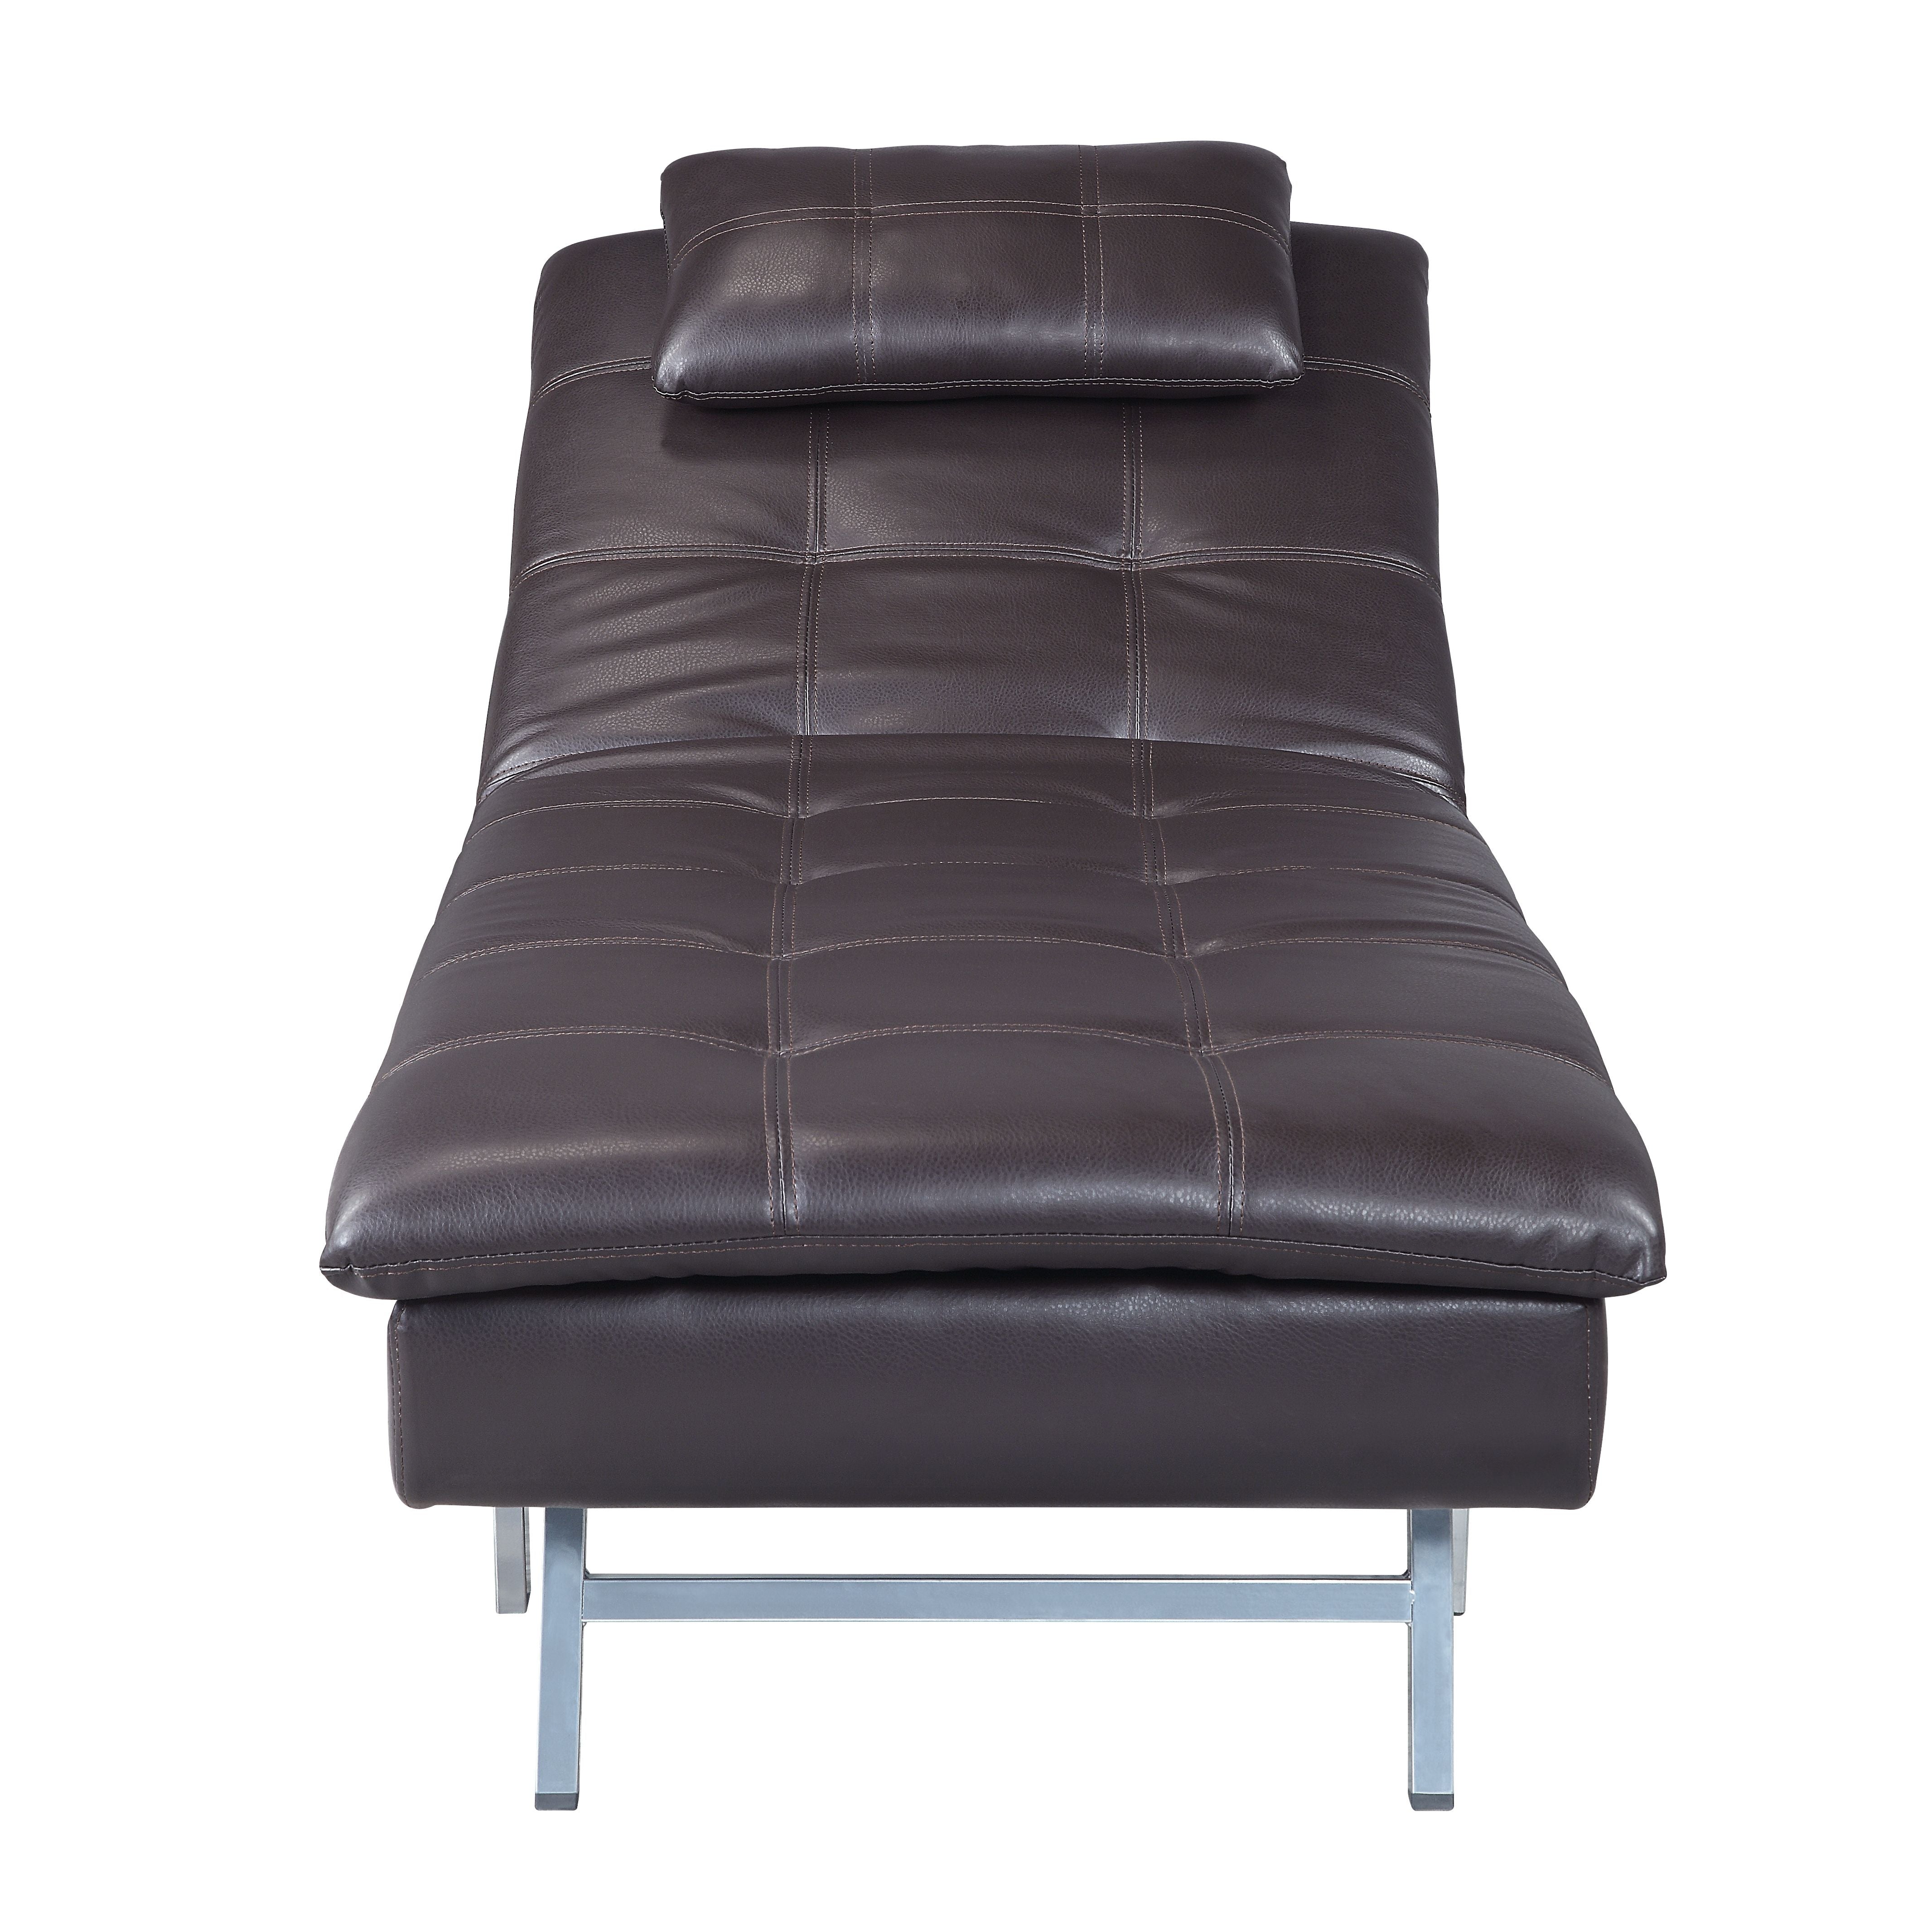 Lucic Chaise Lounge W/Pillow & Usb